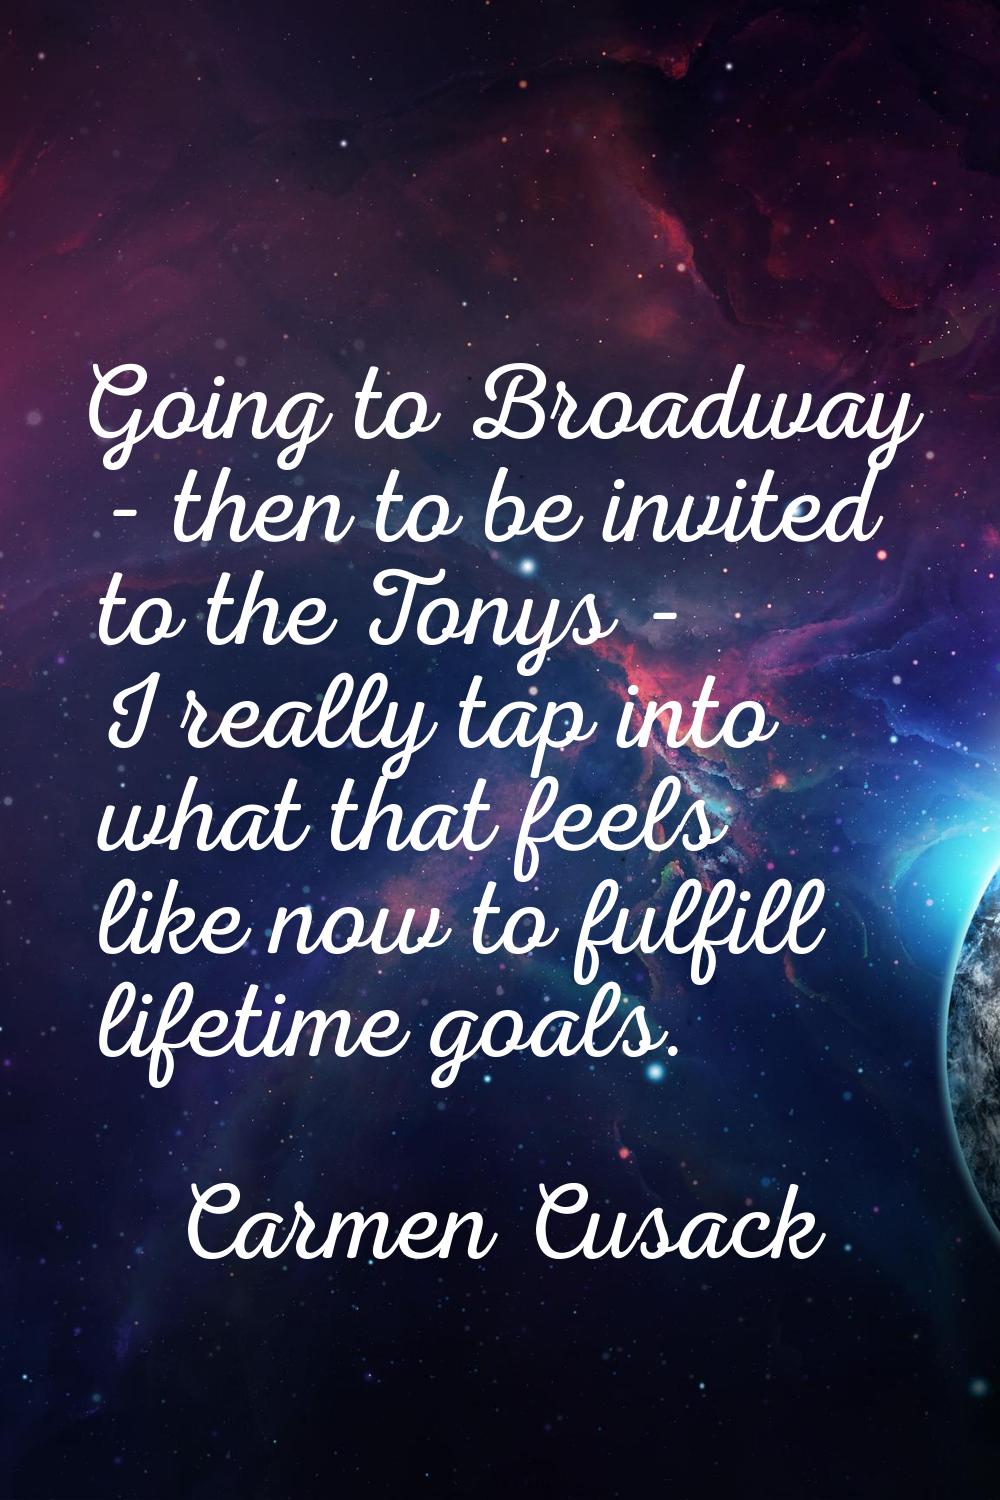 Going to Broadway - then to be invited to the Tonys - I really tap into what that feels like now to